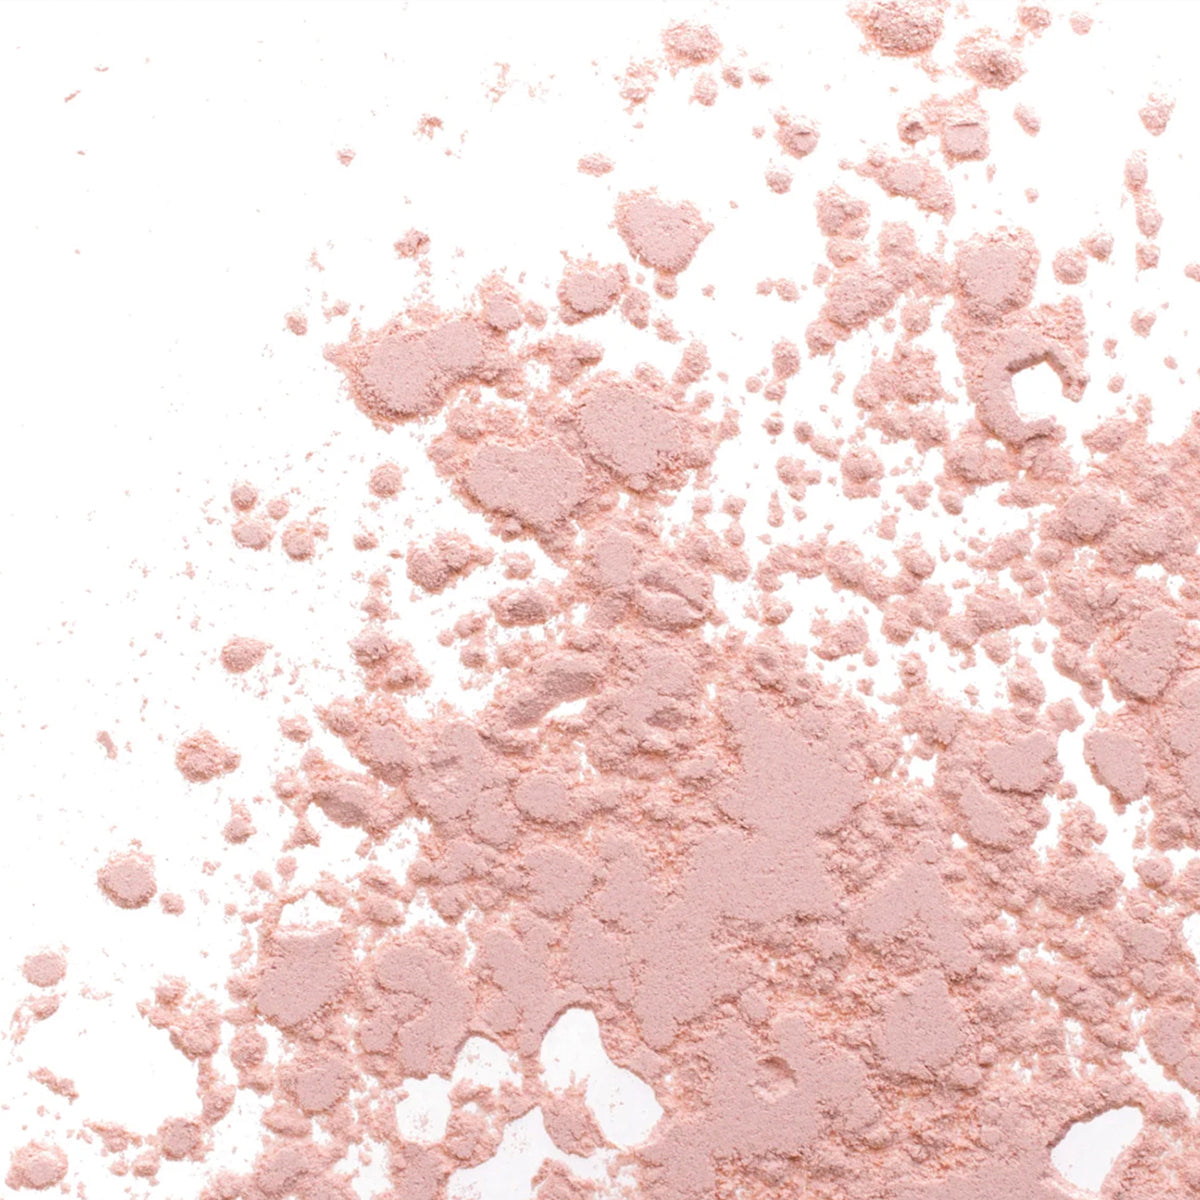 bright pink clay powder scattered on white surface